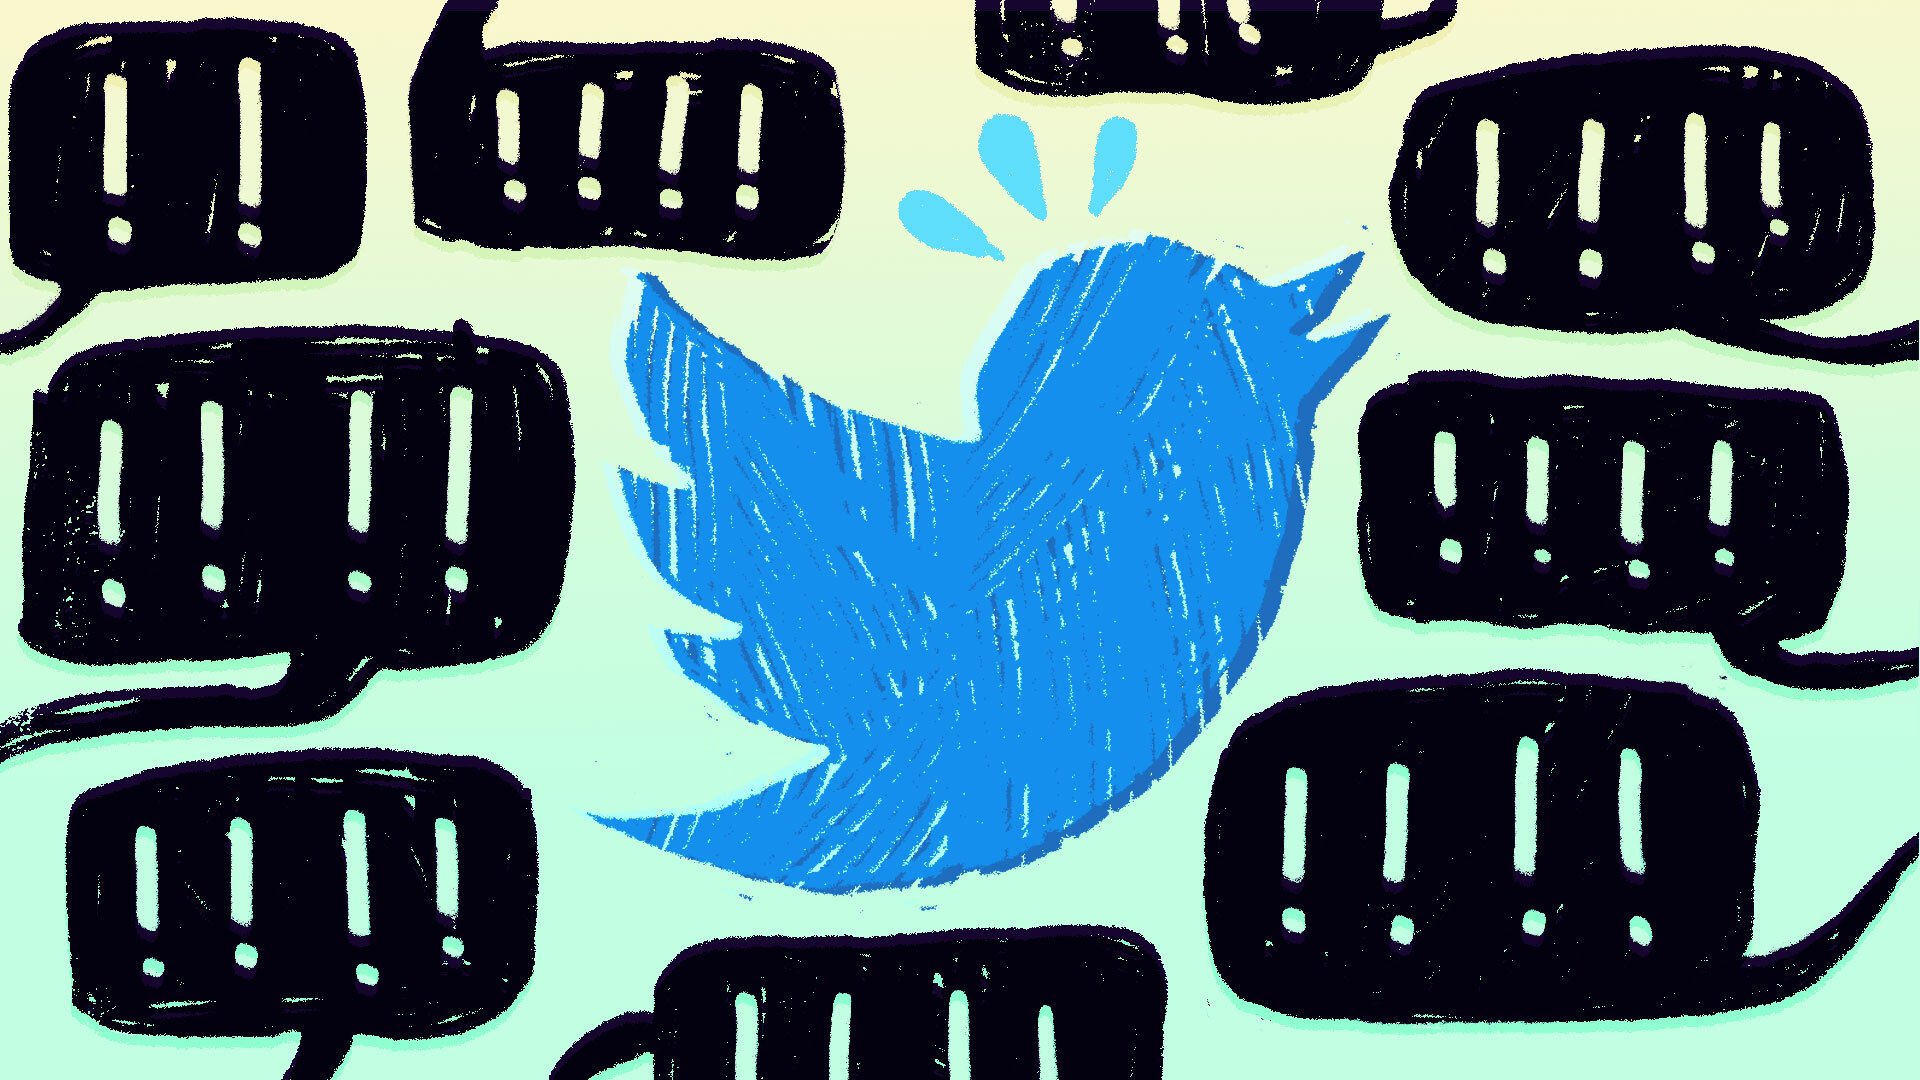 An illustration of the Twitter logo surrounded by speech bubbles filled with exclamation marks.